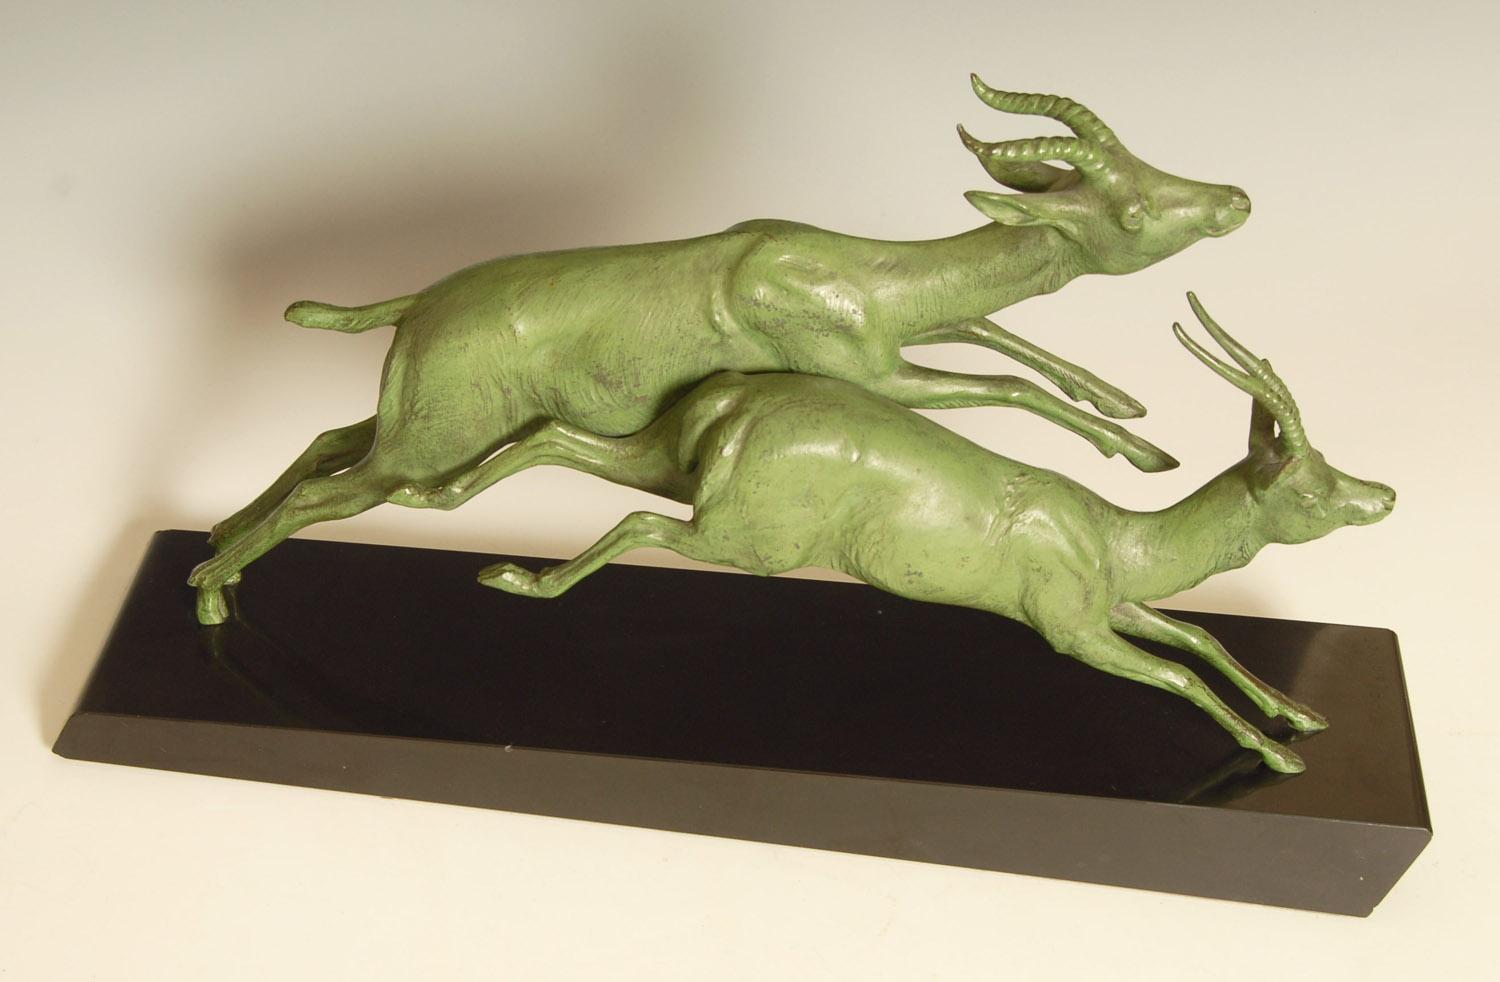 Large French Art Deco sculpture of leaping antelope by Theodore Plagnet.
Patinated metal on black marble base, signed Plagnet.

Price includes free shipping to anywhere in the world.